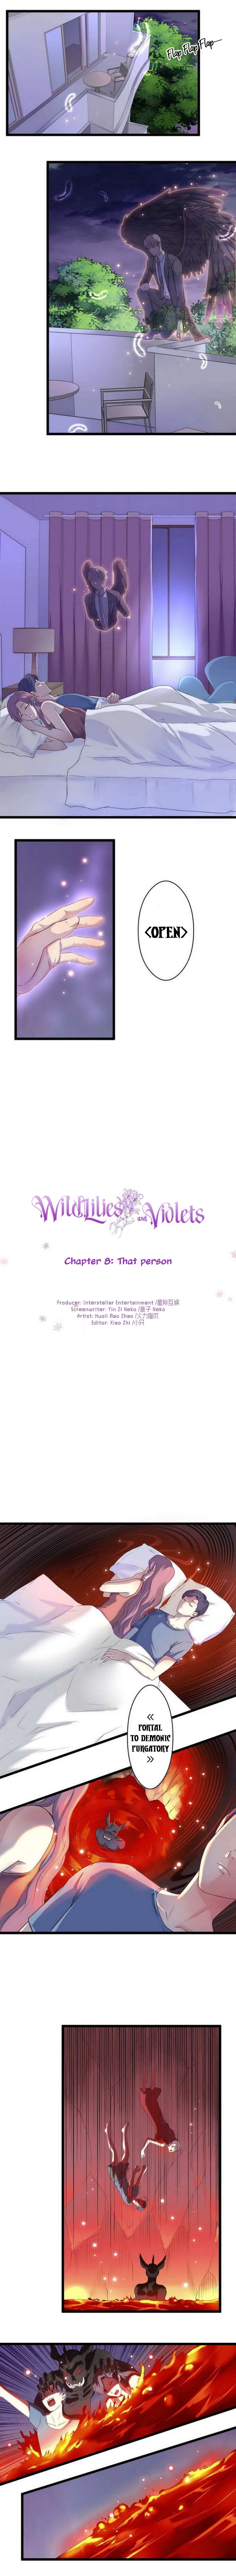 Wild Lilies And Violets - Page 2